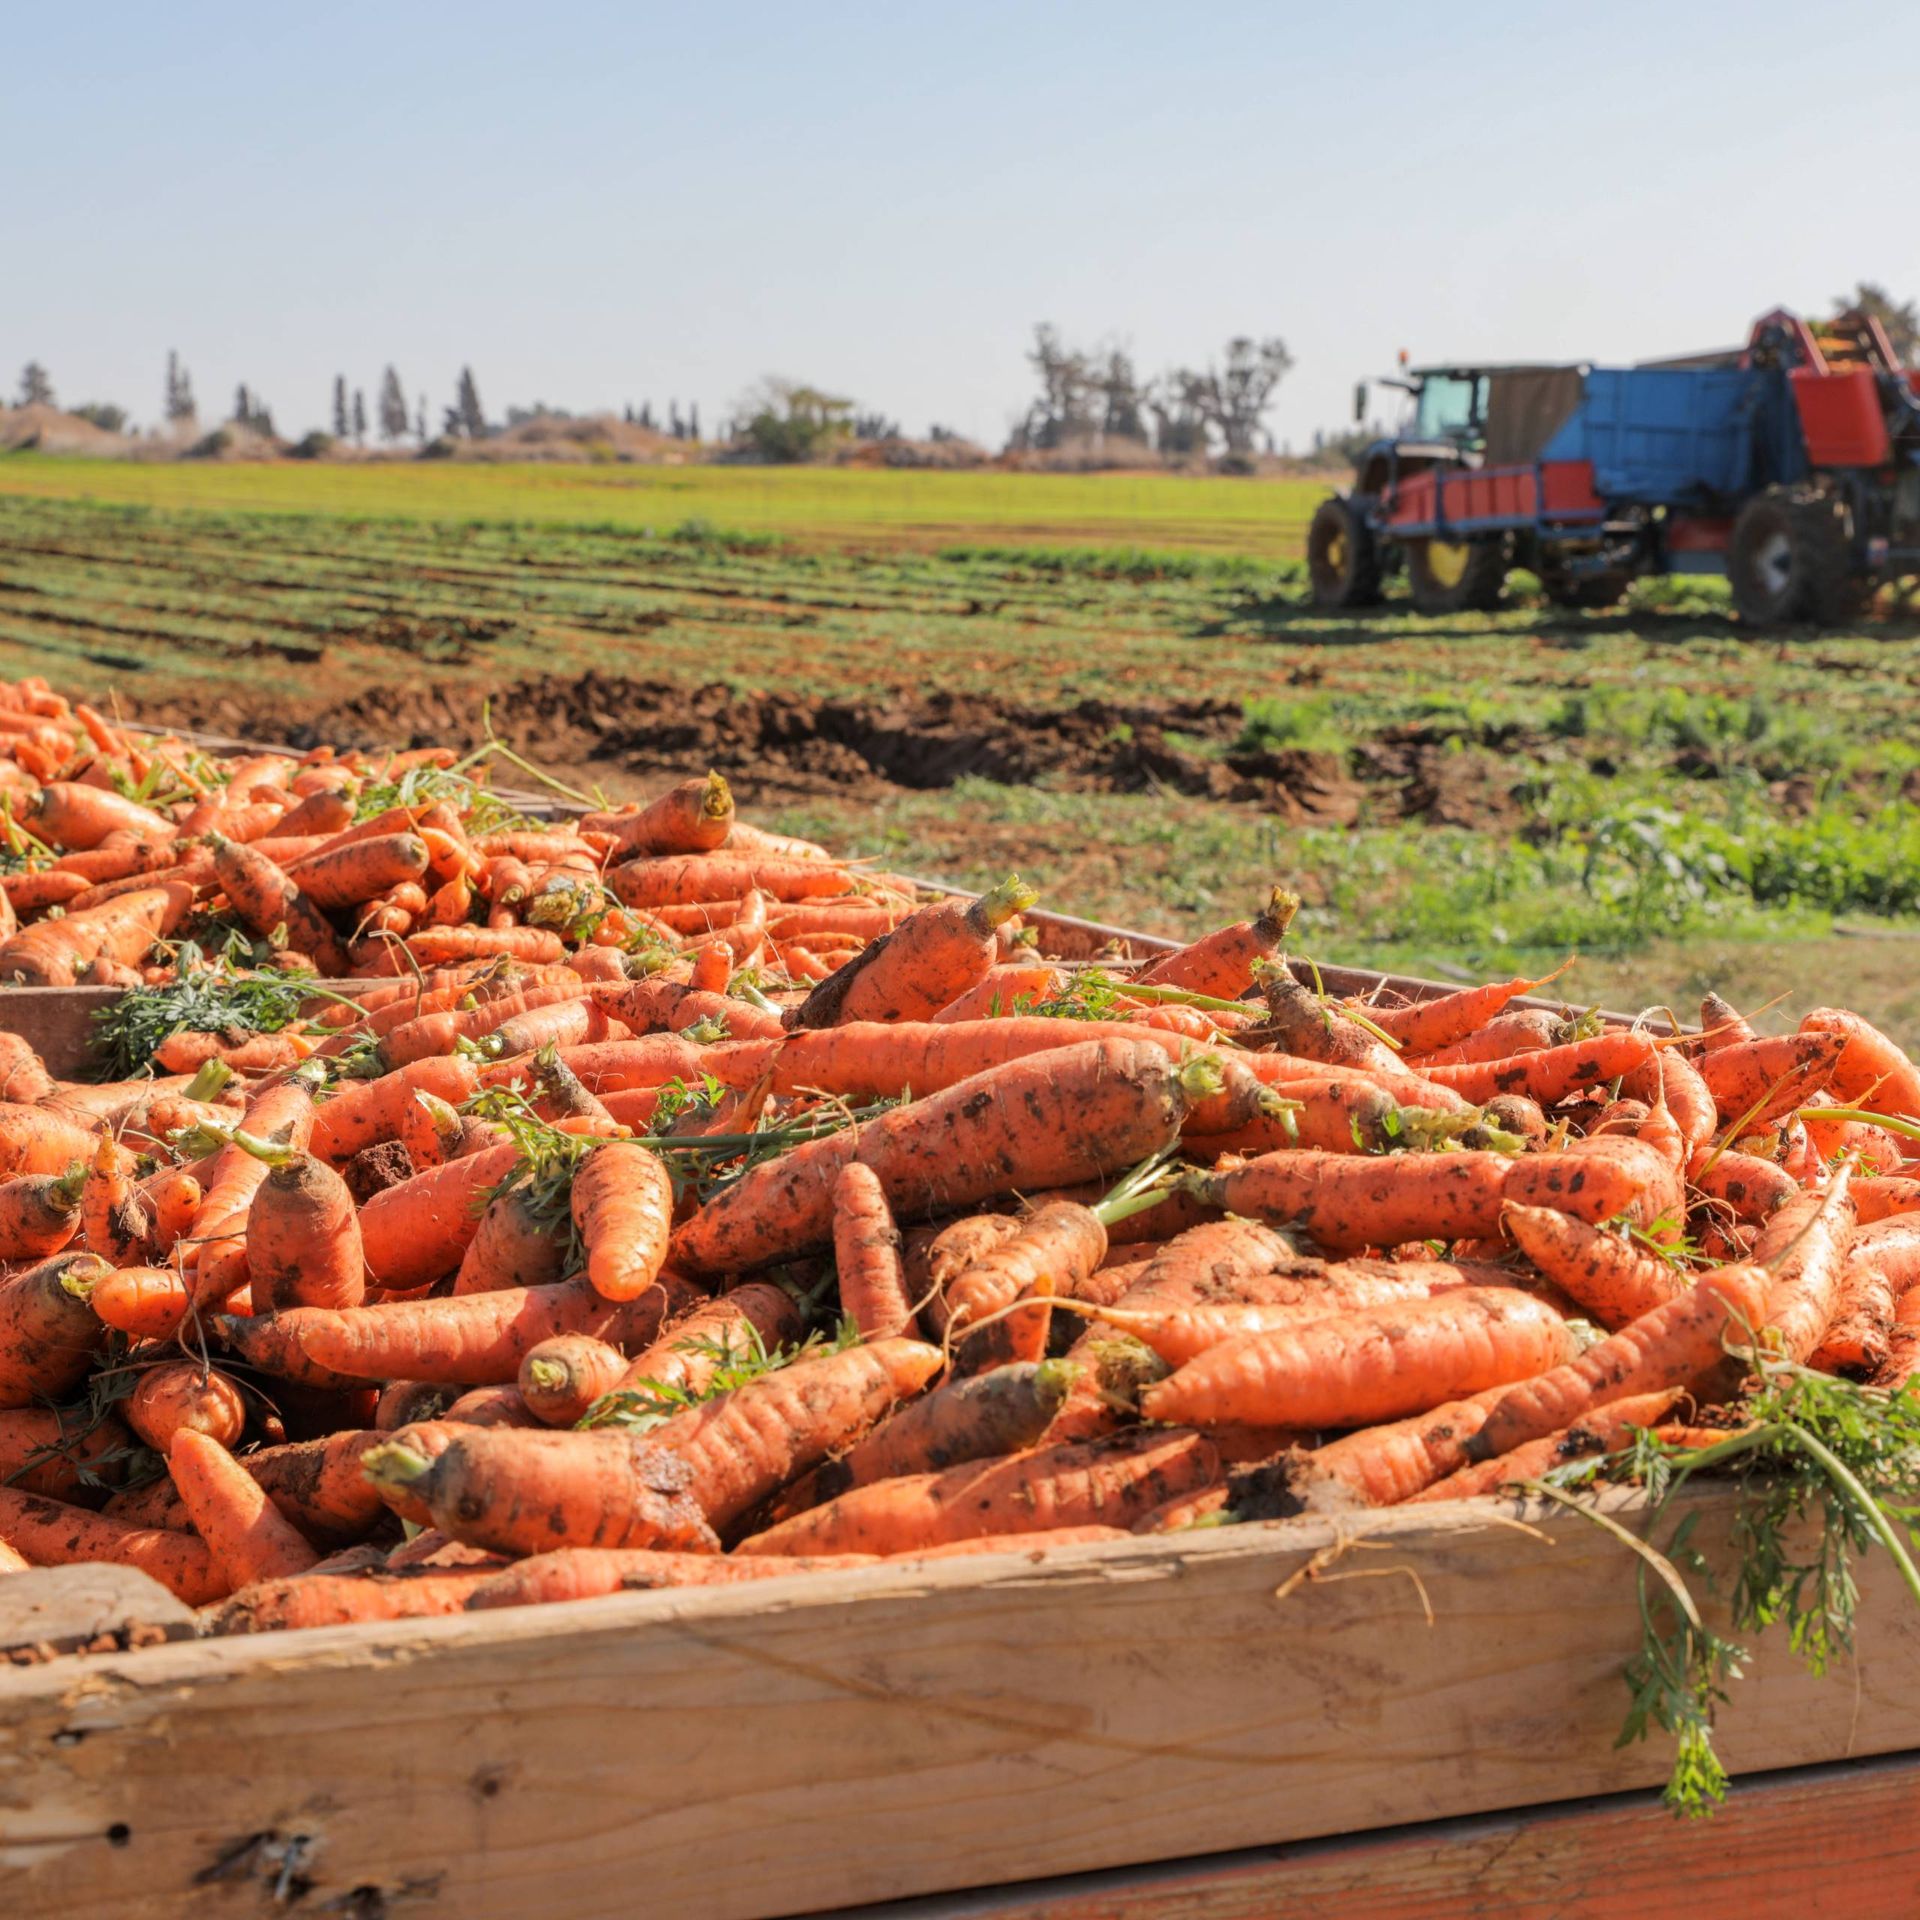 Image of a vegetable producer harvesting carrots for export